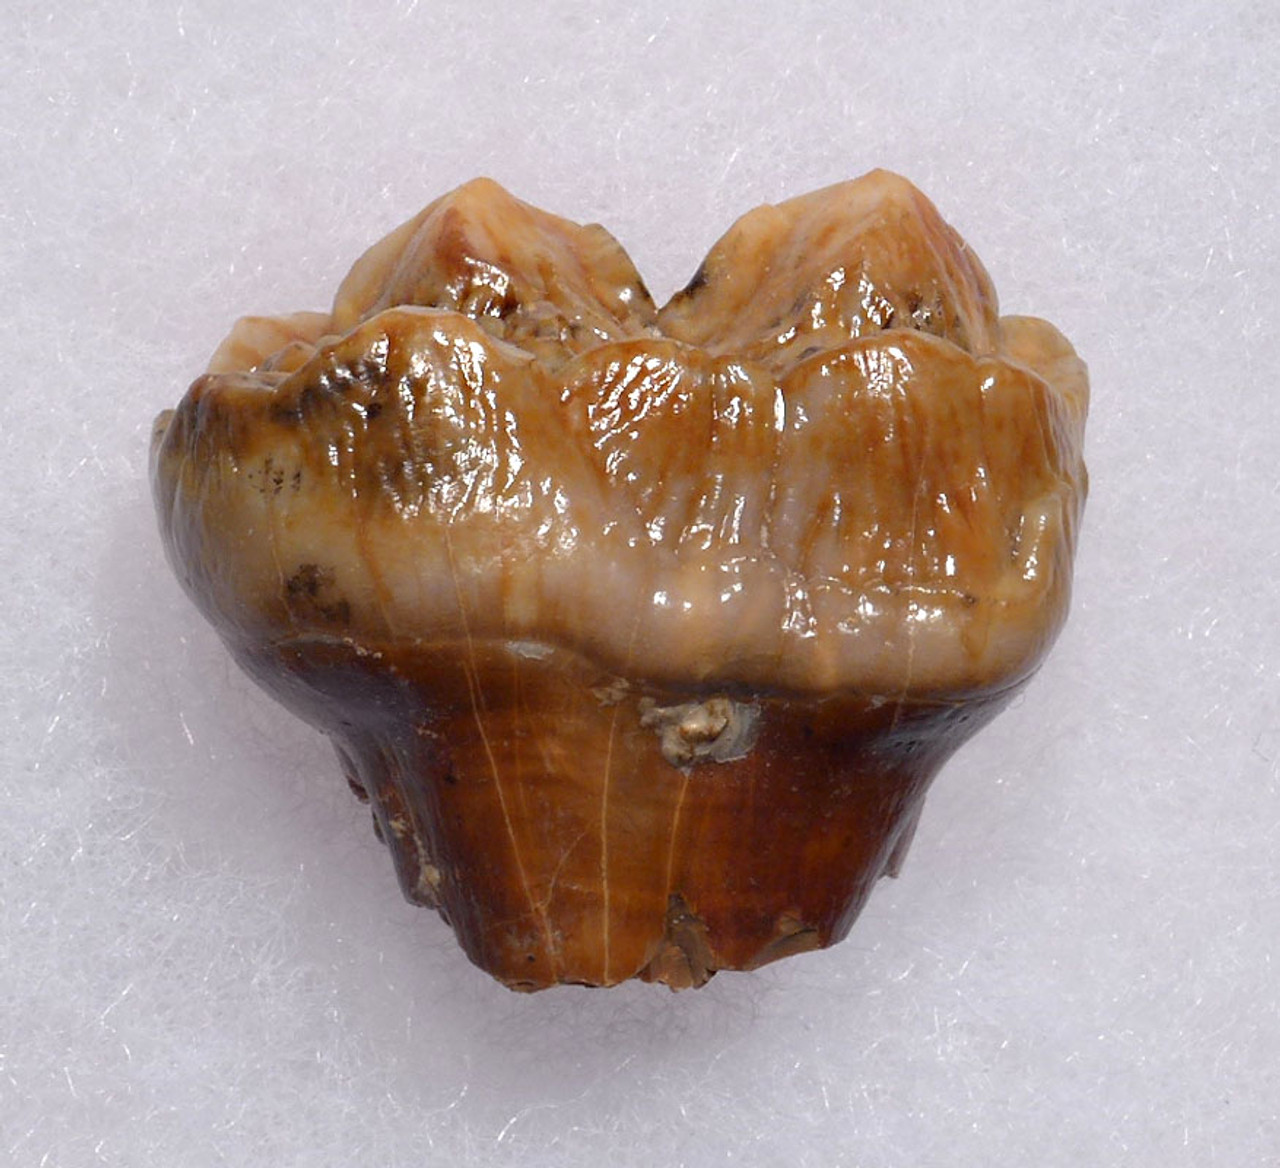 AUSTRIAN CAVE BEAR FOSSIL MOLAR TOOTH WITH PARTIAL ROOT FROM THE FAMOUS DRACHENHOHLE DRAGONS CAVE *LM40-172